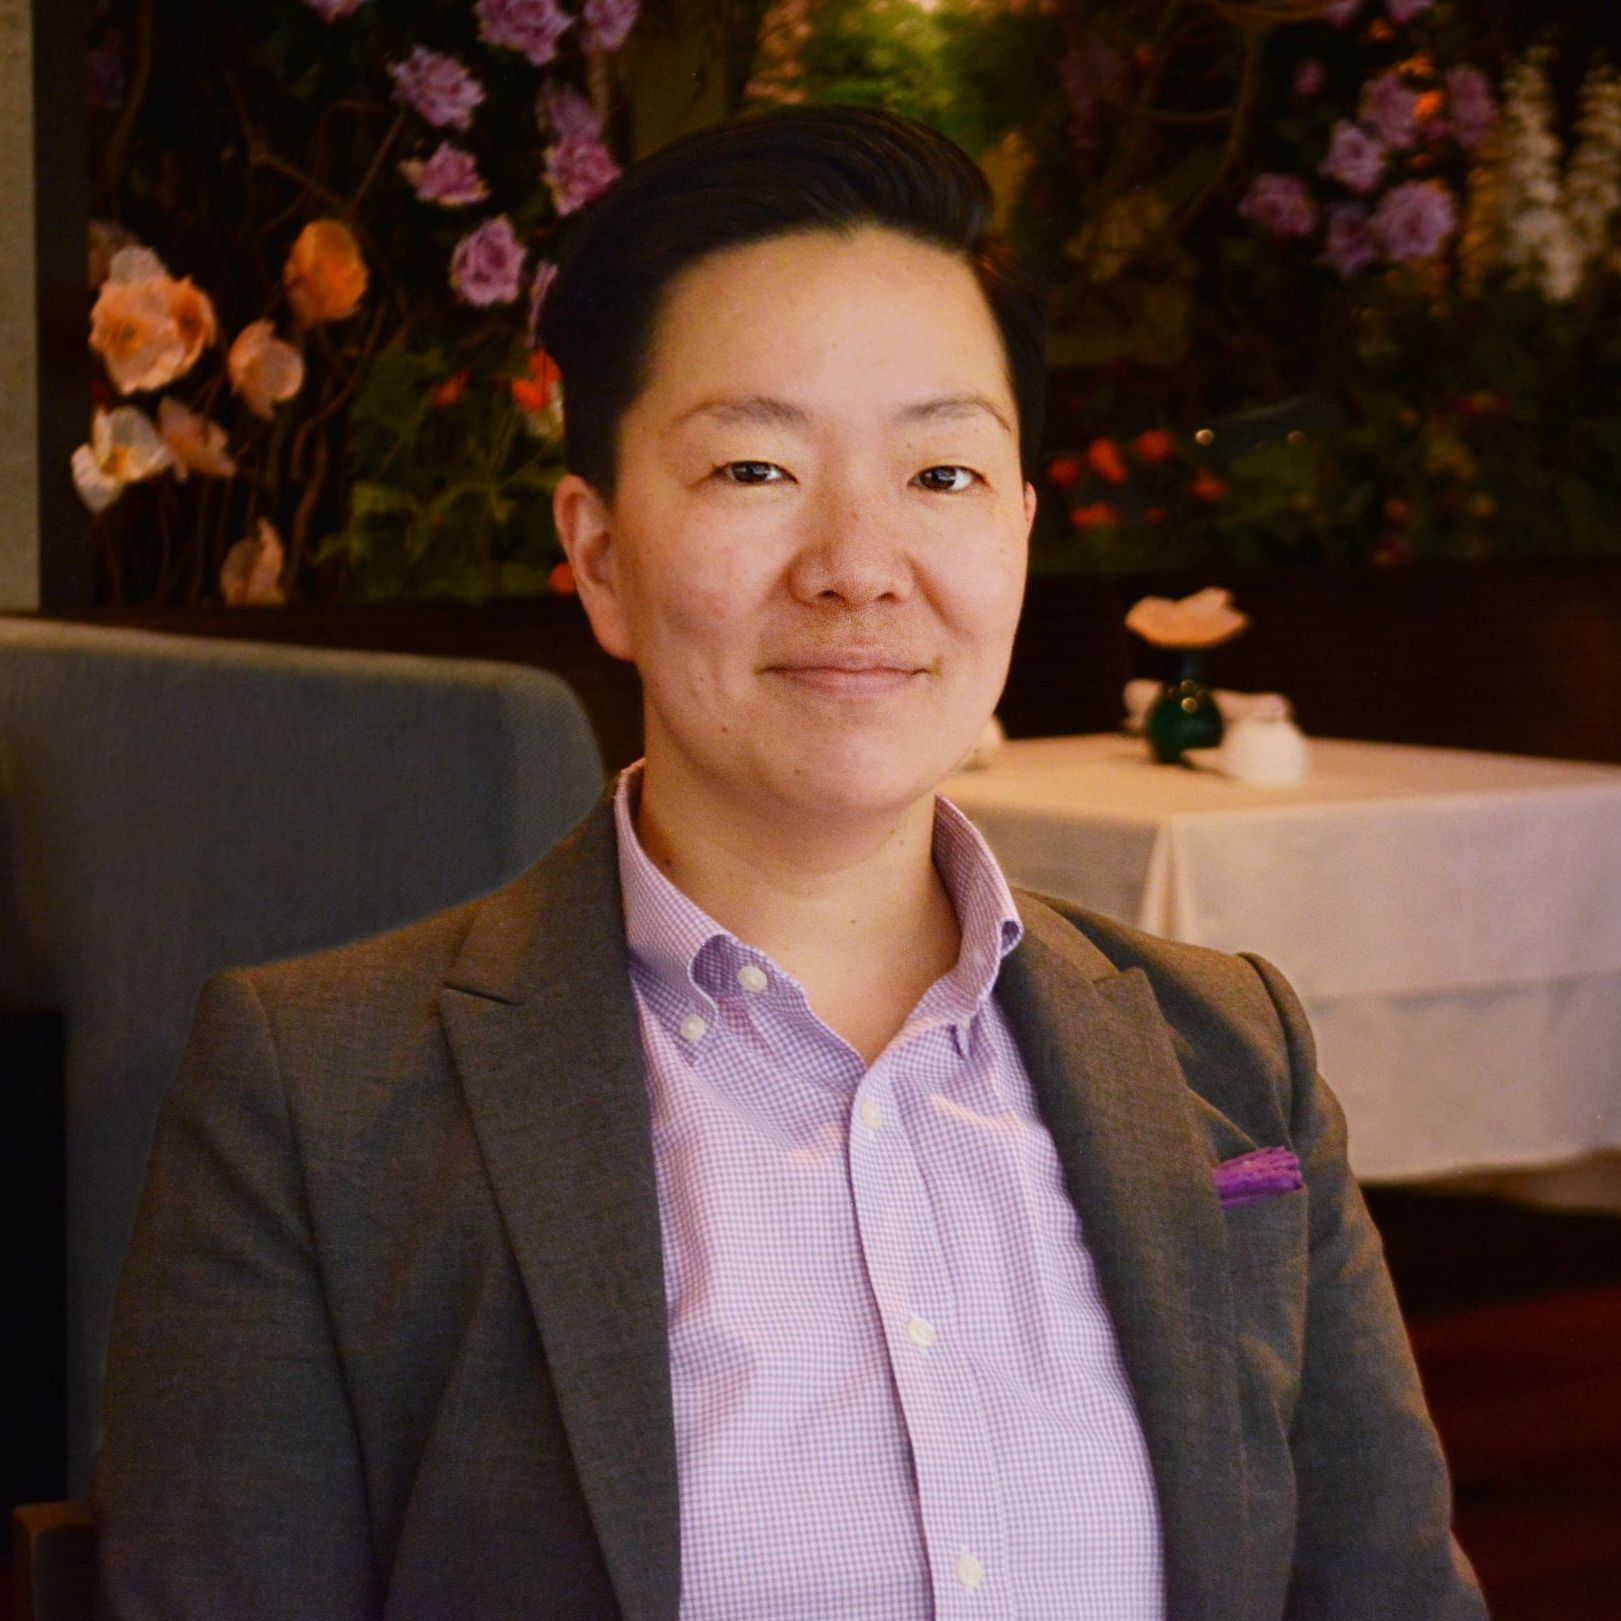 susan lee, a woman with short black hair, wearing a lavendar button down under a grey blazer. in the background we see the ai fiori dining room - tables with white table cloths and flowers.